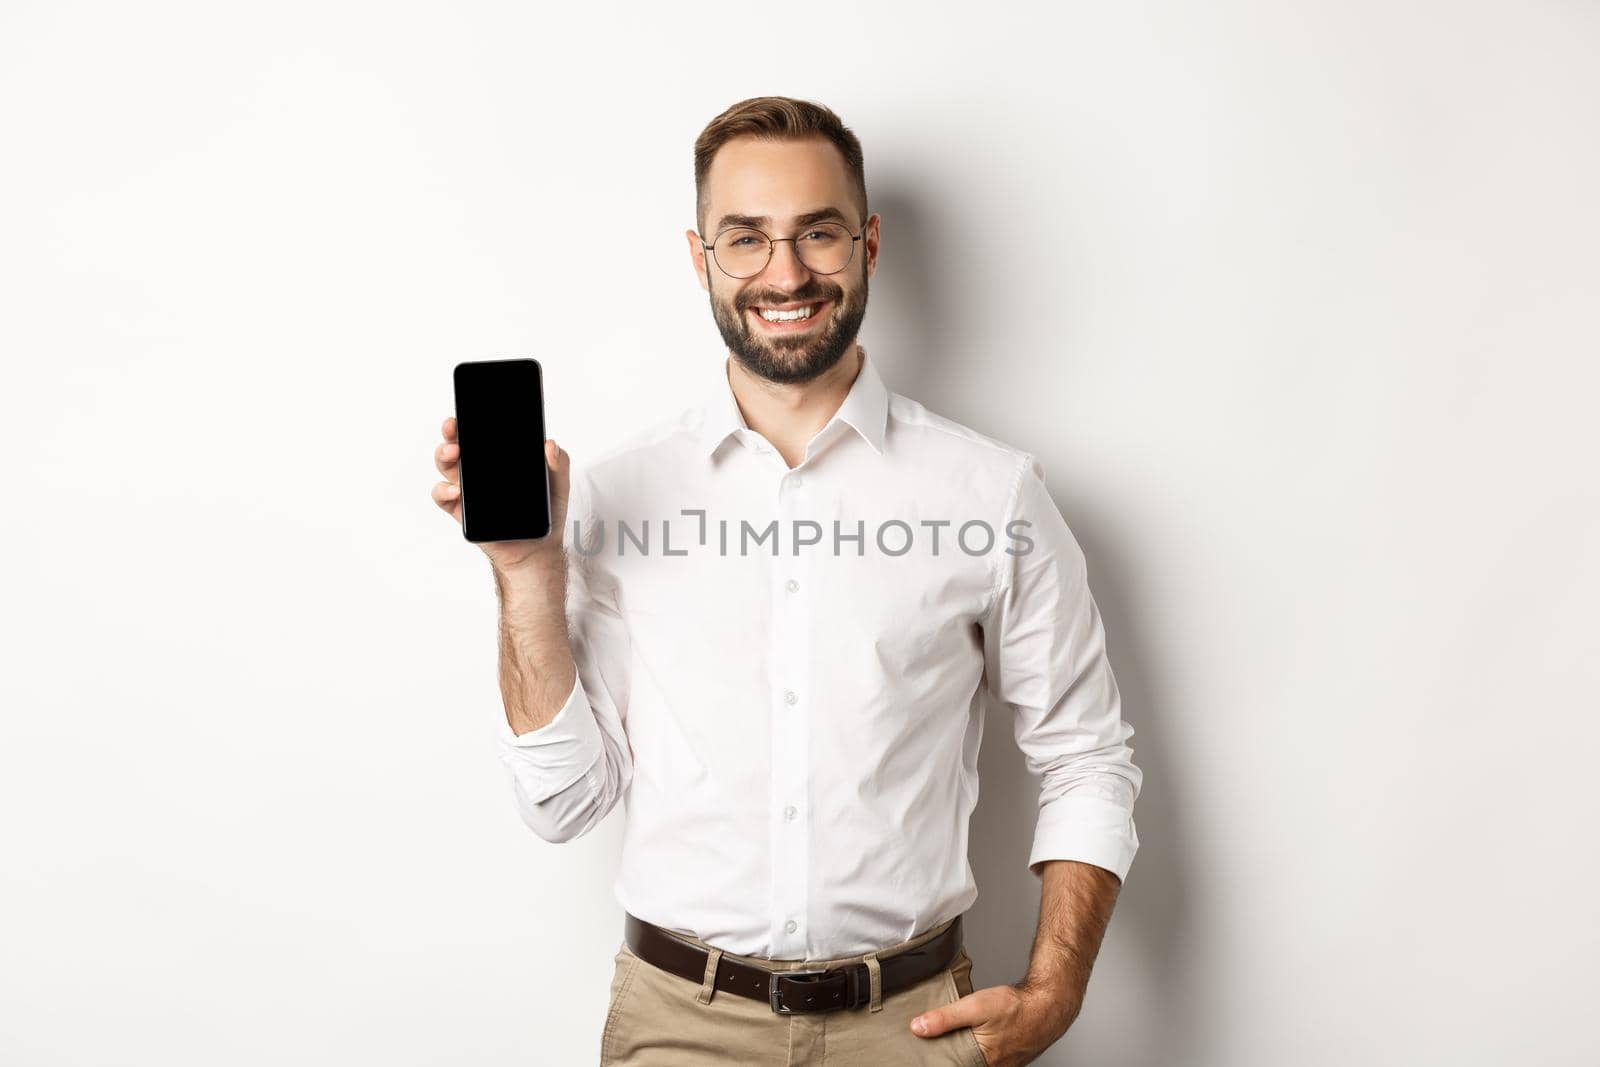 Satisfied business man showing mobile screen, smiling proudly, standing over white background.